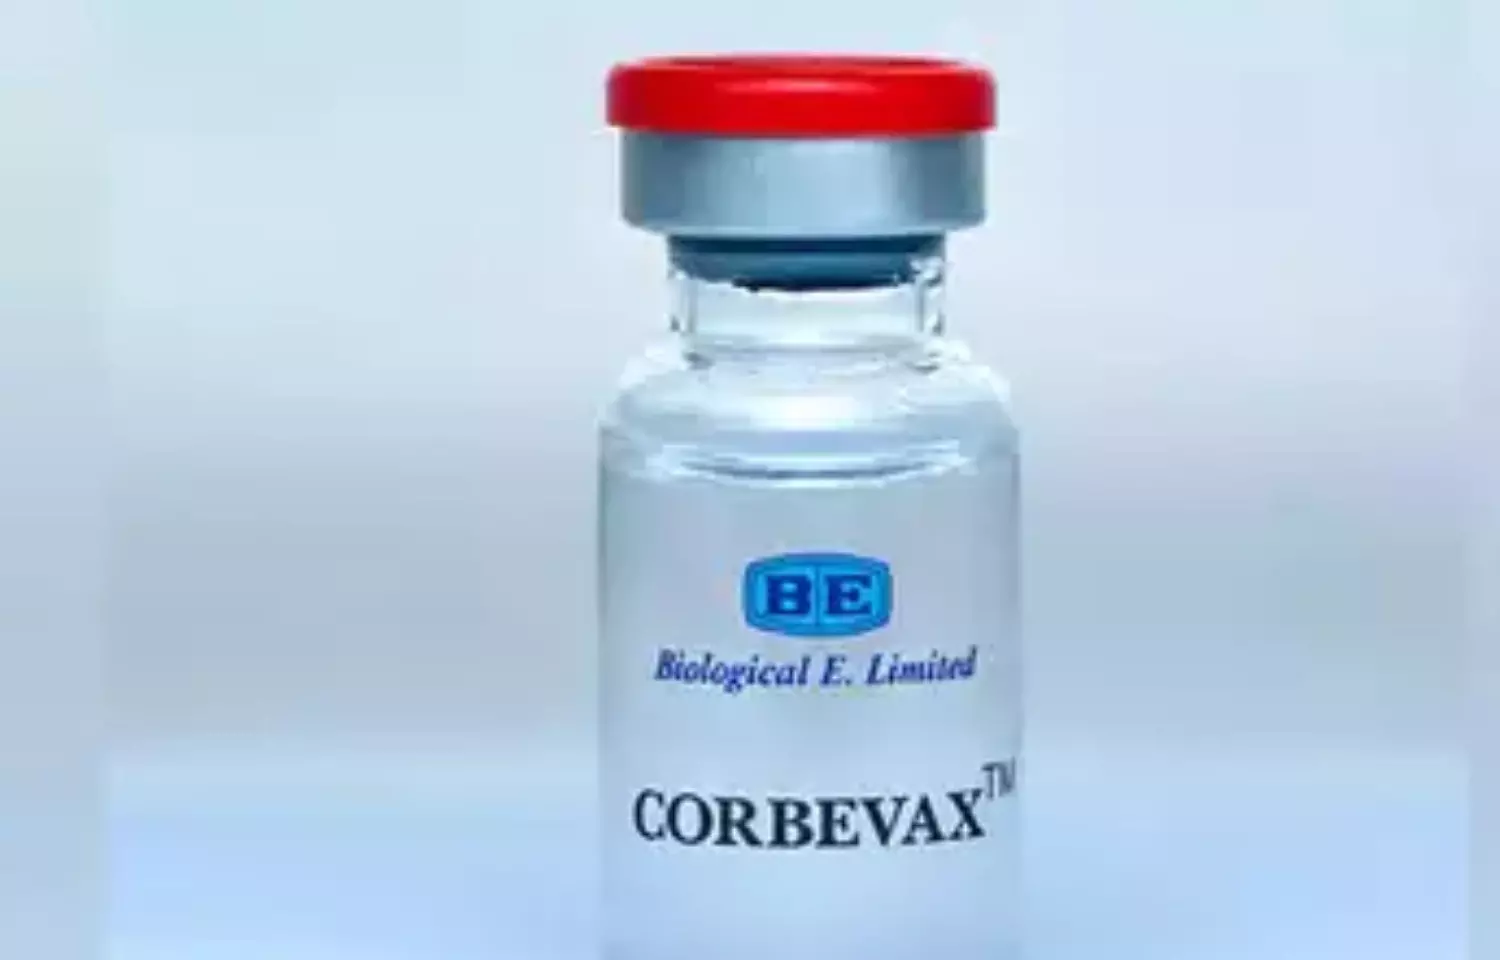 COVID vaccine Corbevax to cost Rs 145  for govt, Rs 990 in private market